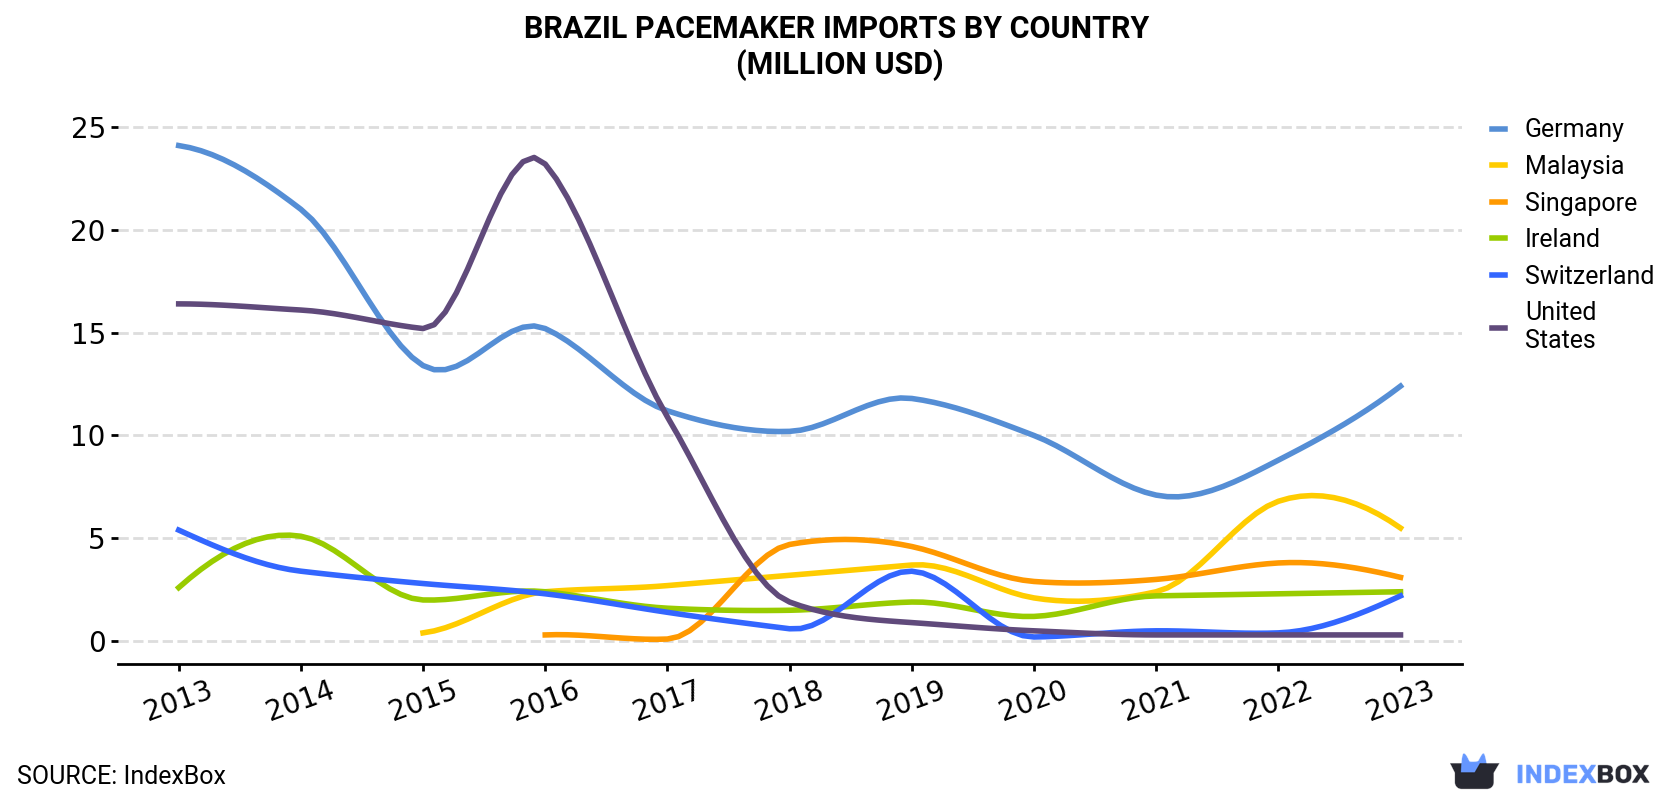 Brazil Pacemaker Imports By Country (Million USD)